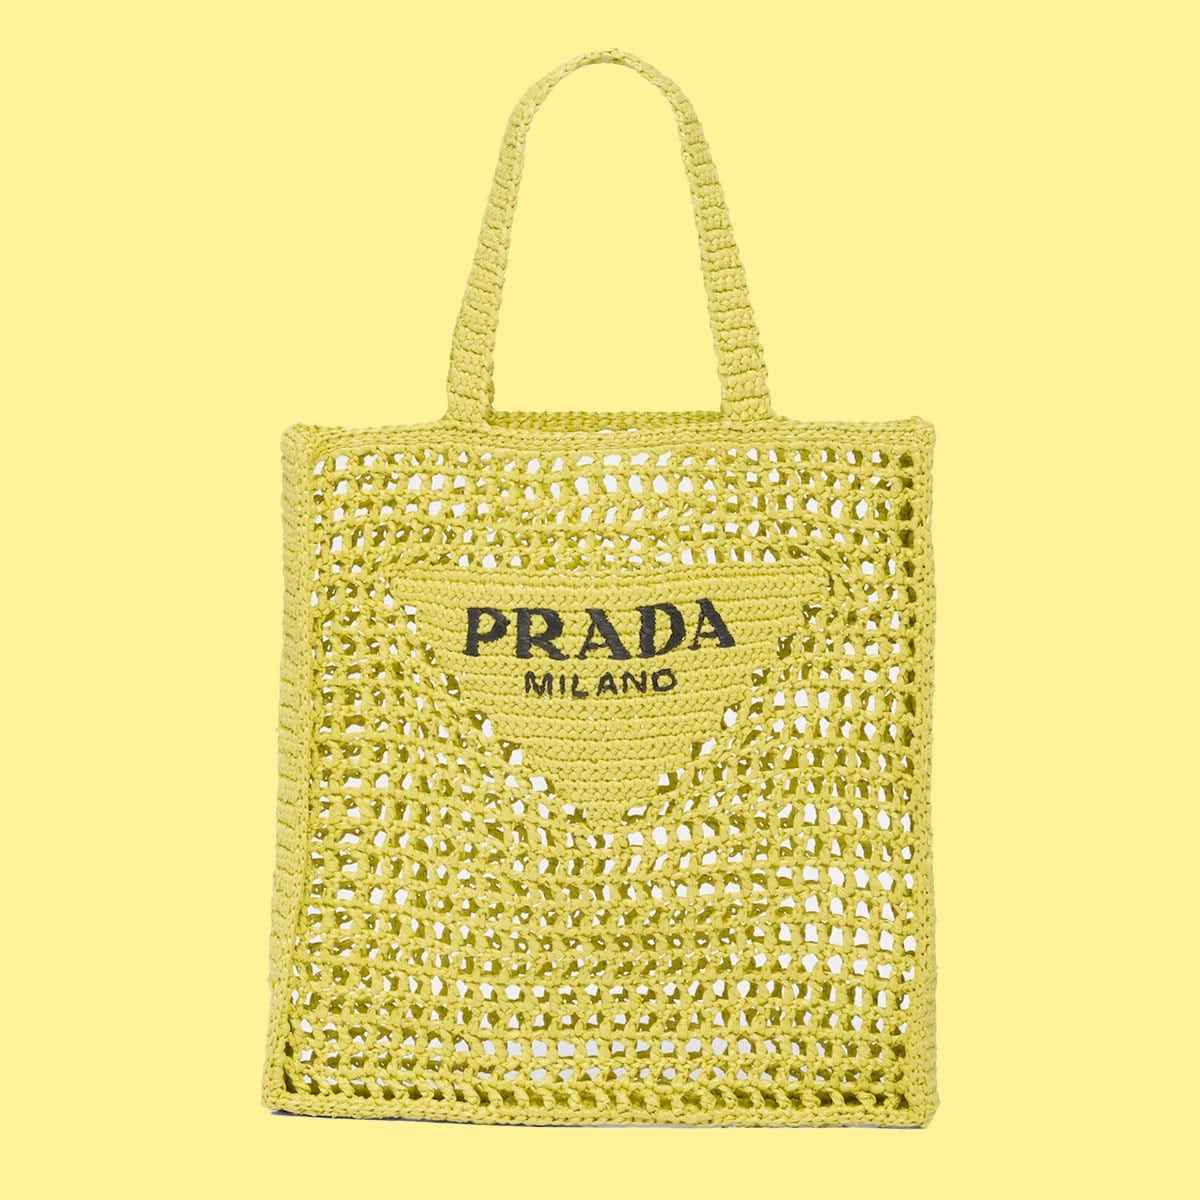 I’m Just a Girl Who Wants This Prada Raffia Bag In Every Color - PurseBlog